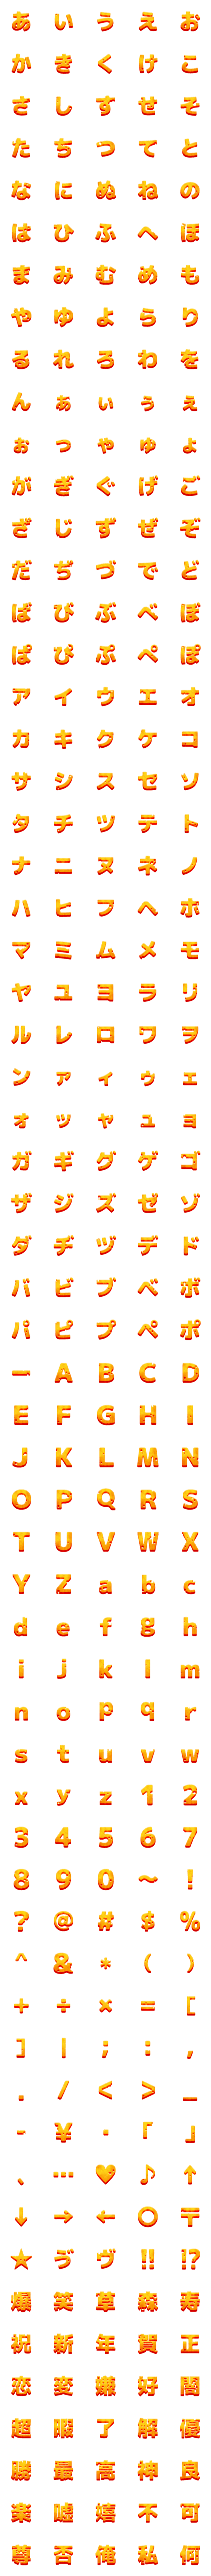 [LINE絵文字]シンプルチーズデコ文字 丸ゴシックの画像一覧